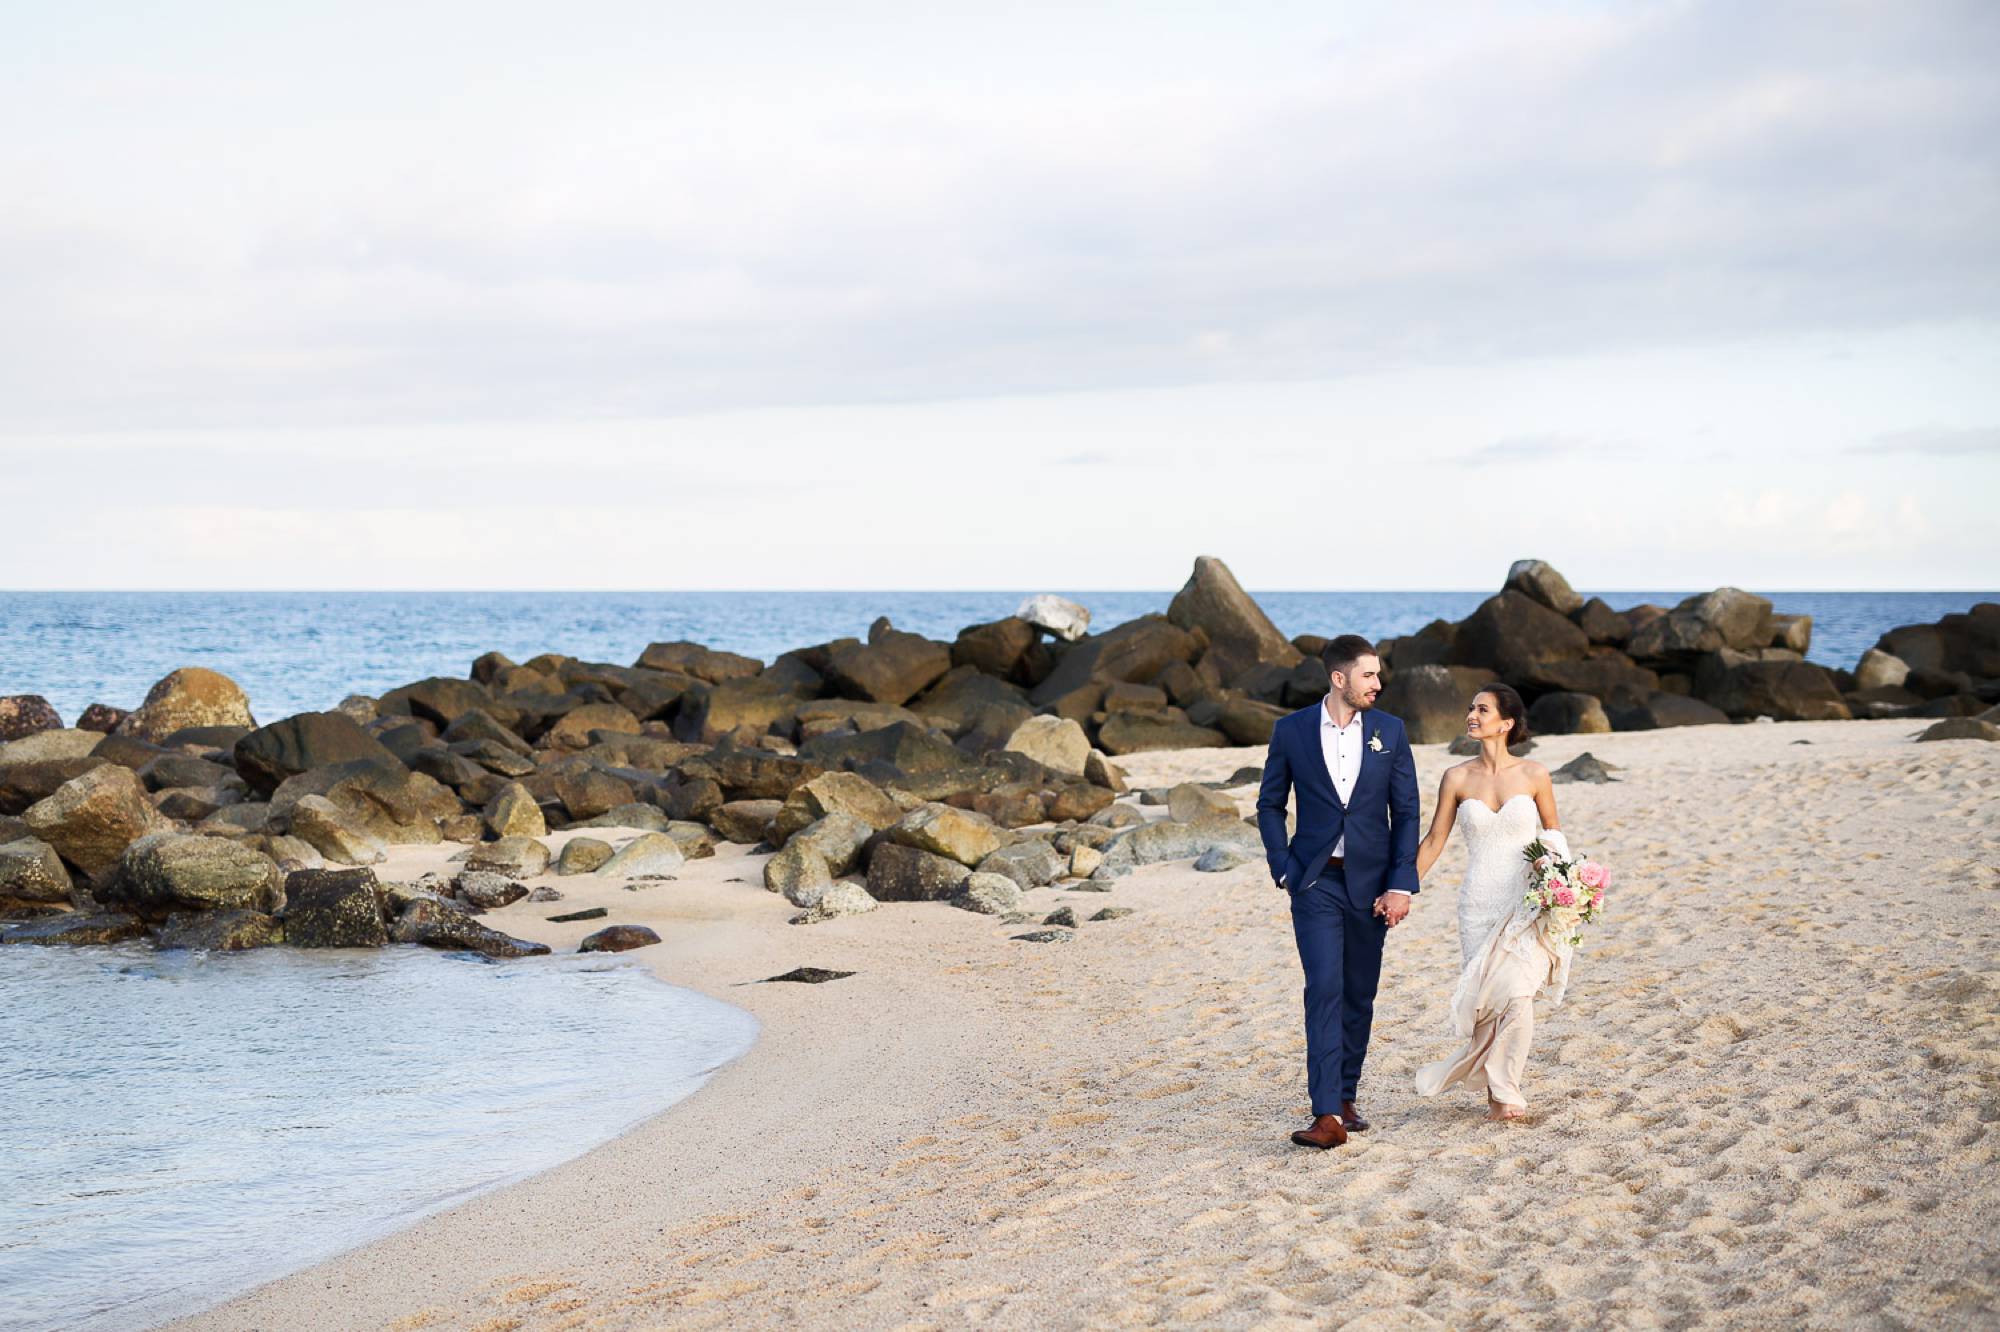 Couple walking to reception on beach